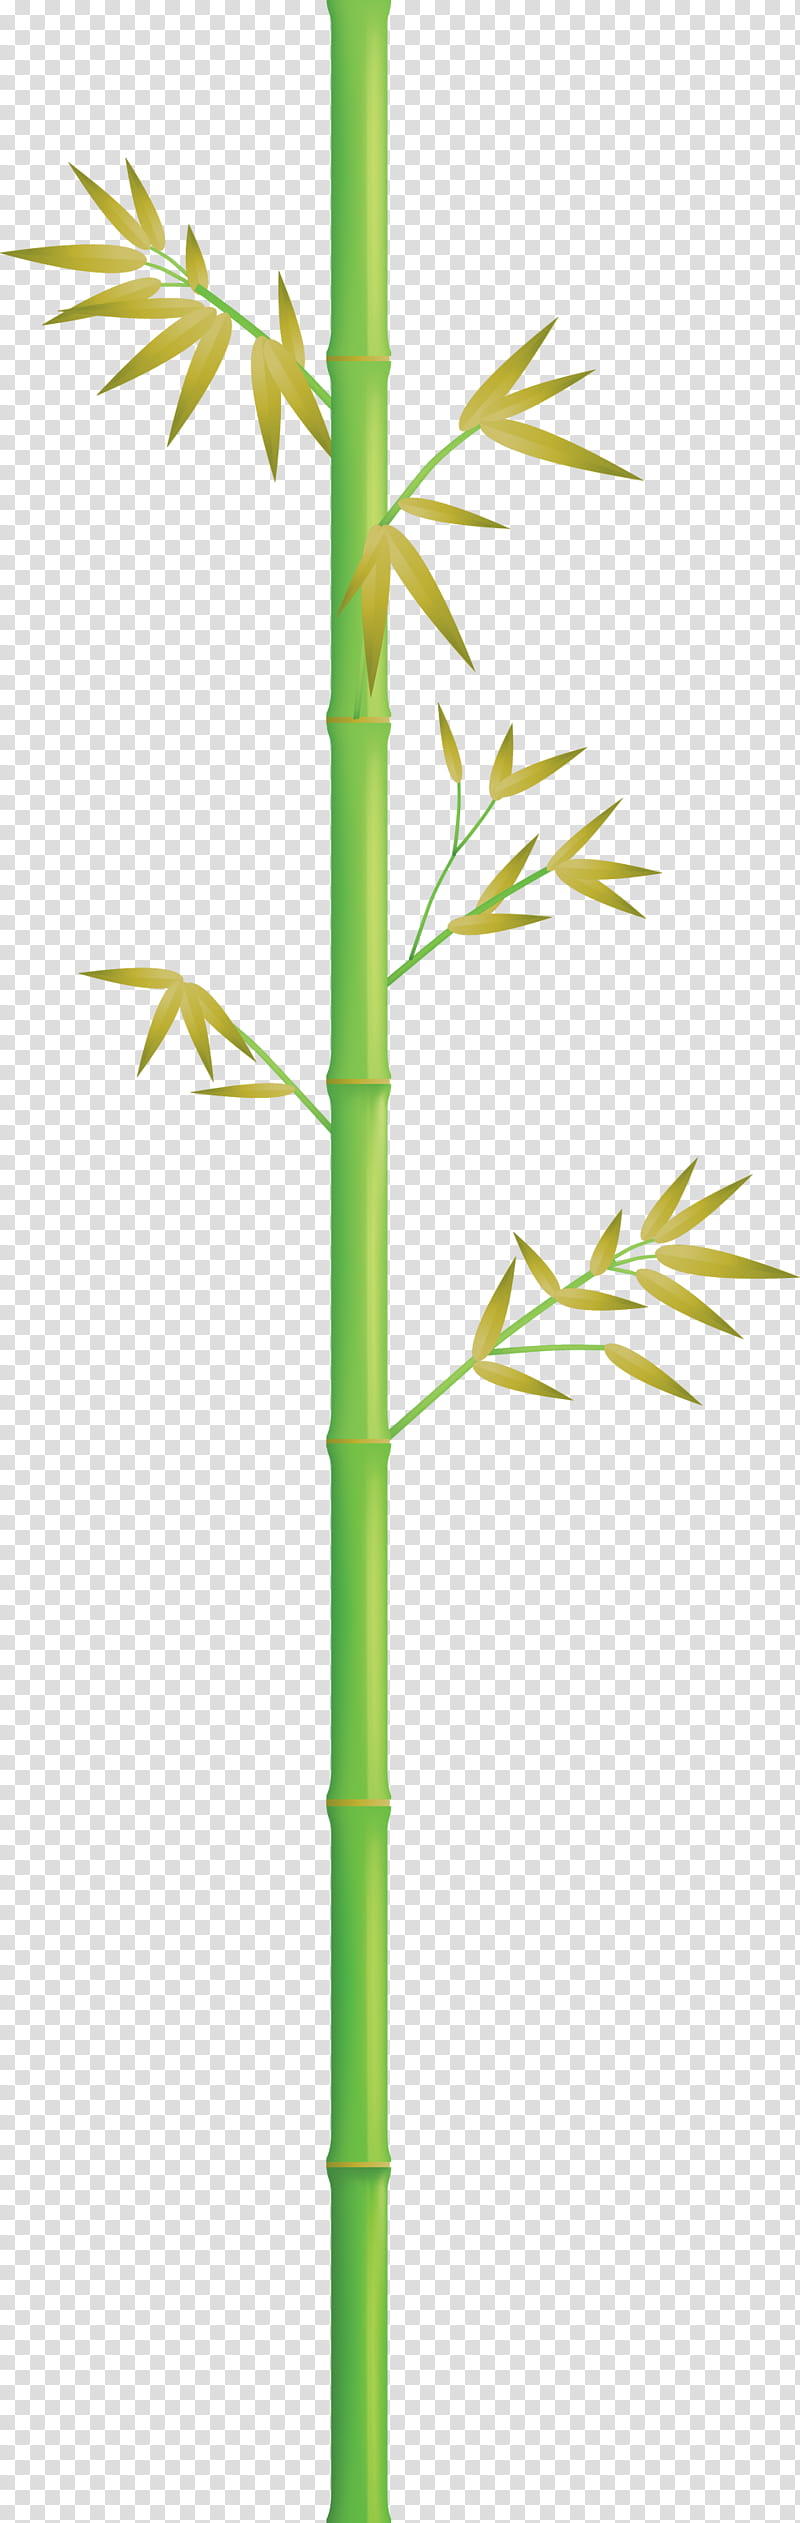 bamboo leaf, Plant Stem, Grass Family, Flower, Elymus Repens transparent background PNG clipart